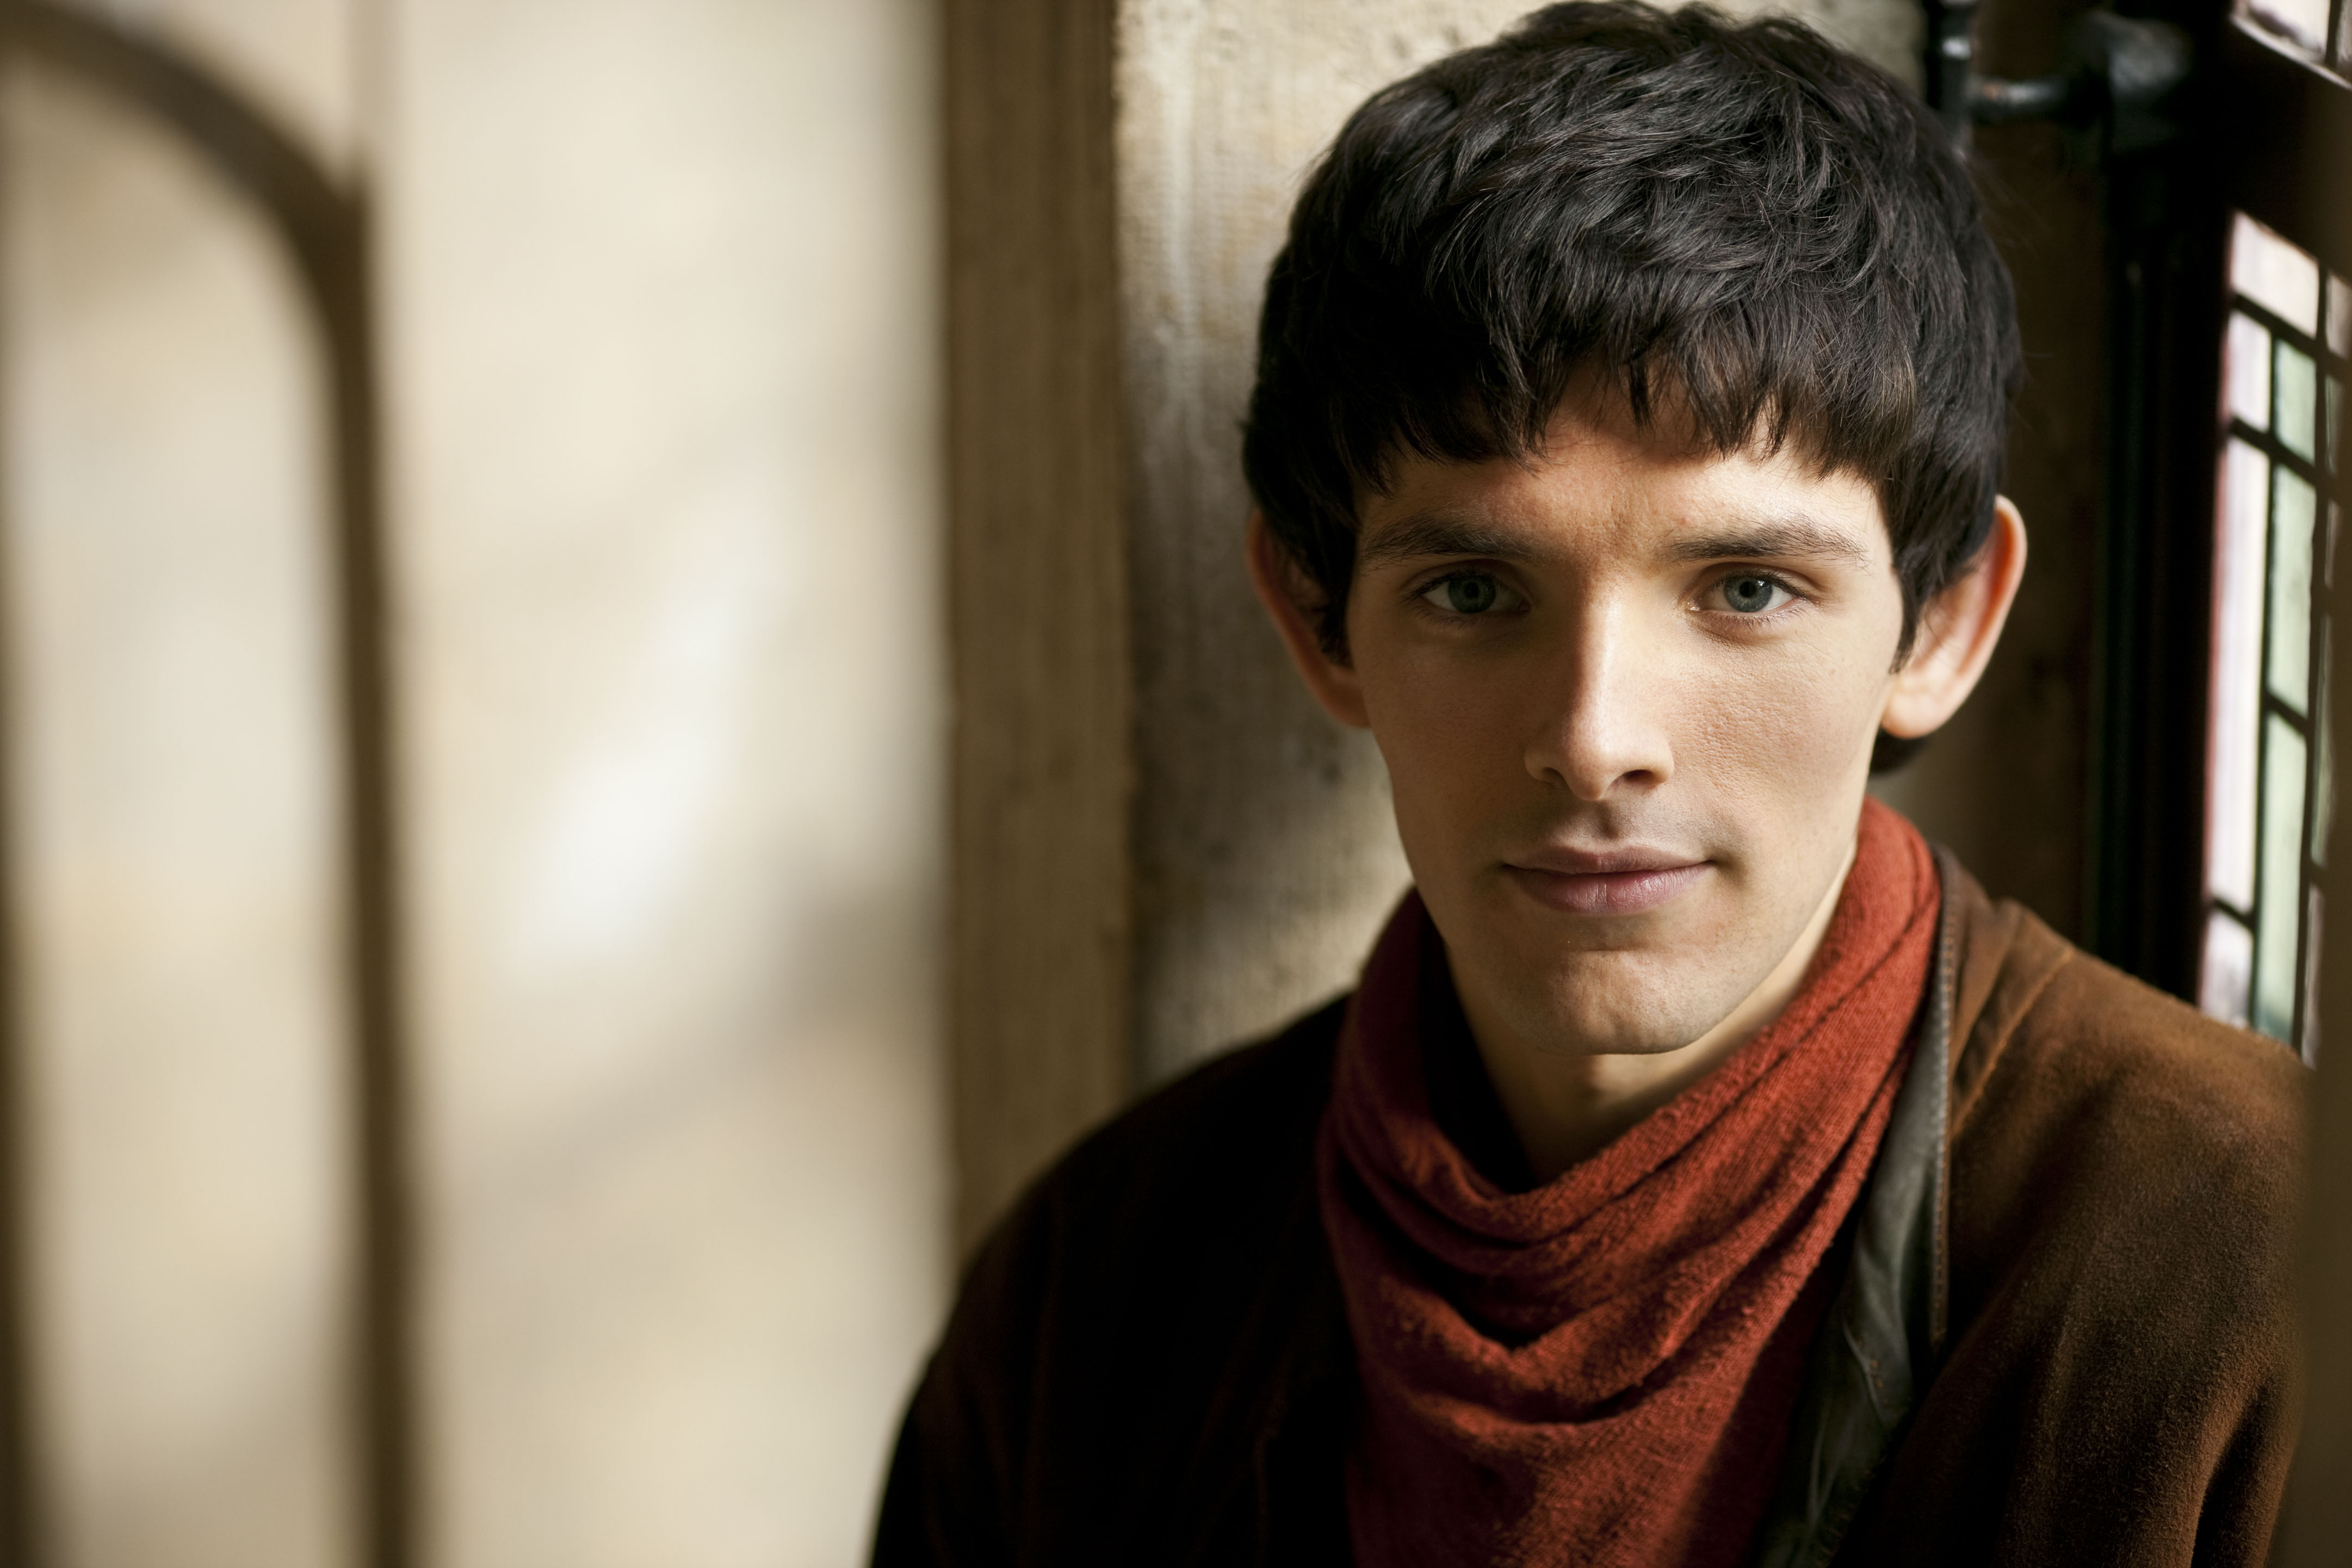 Merlin movie on the way from Hobbit writer | SciFiNow - The World's Best Science ...4324 x 2883